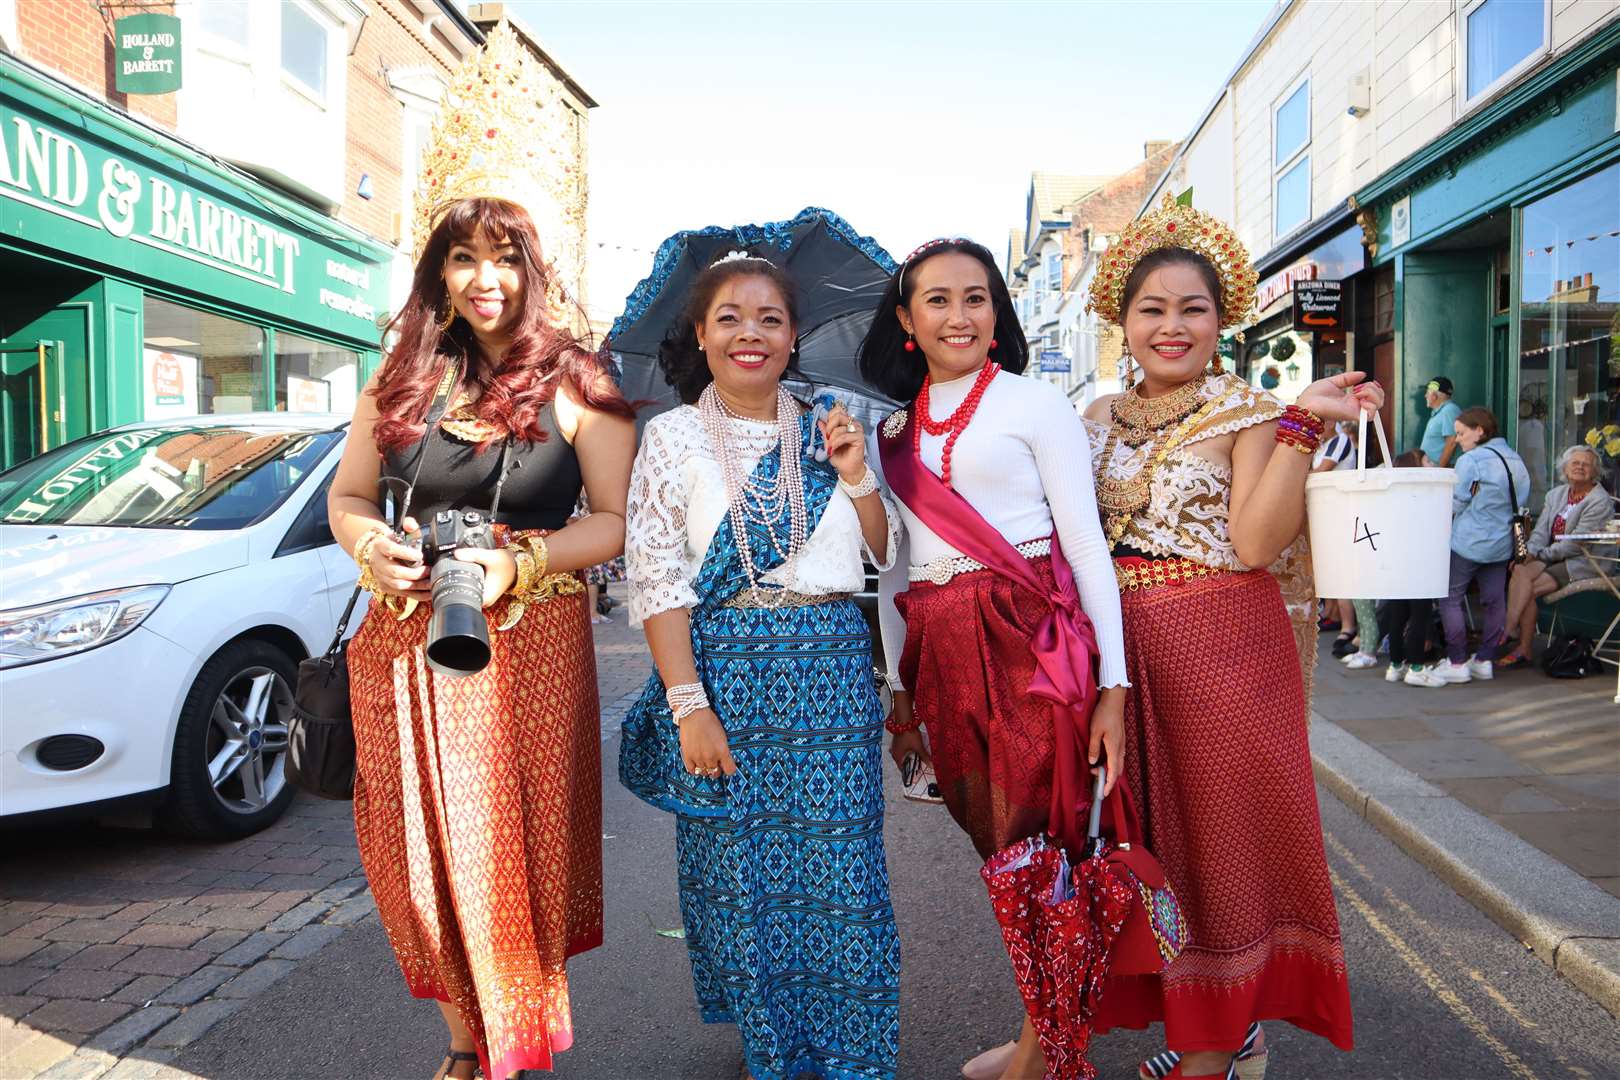 Adding colour to the Sheppey summer carnival in Sheerness on Saturday were these four Thai ladies from the Island